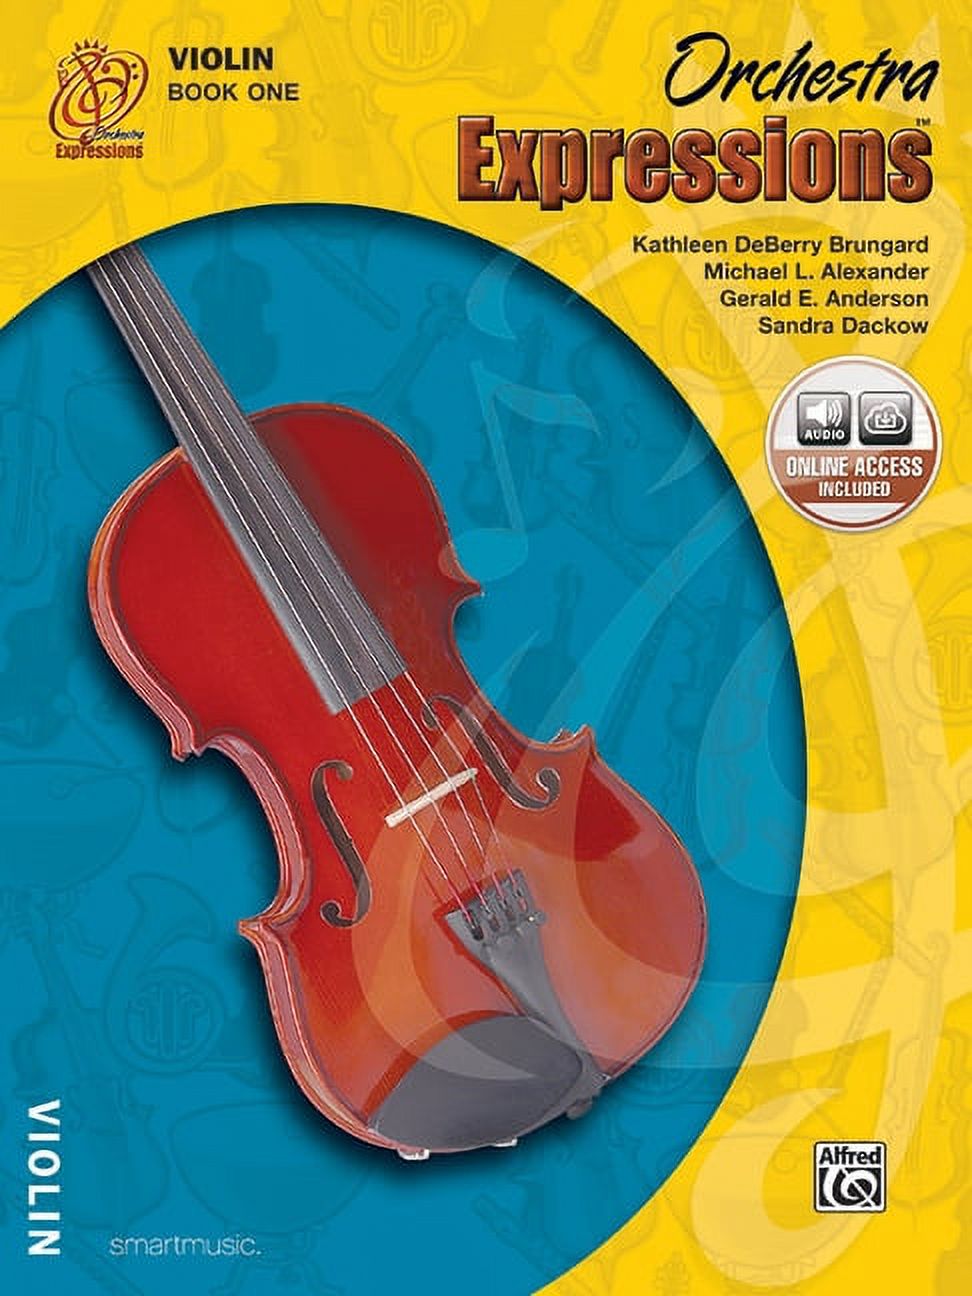 Orchestra Expressions, Book One Student Edition - image 1 of 2